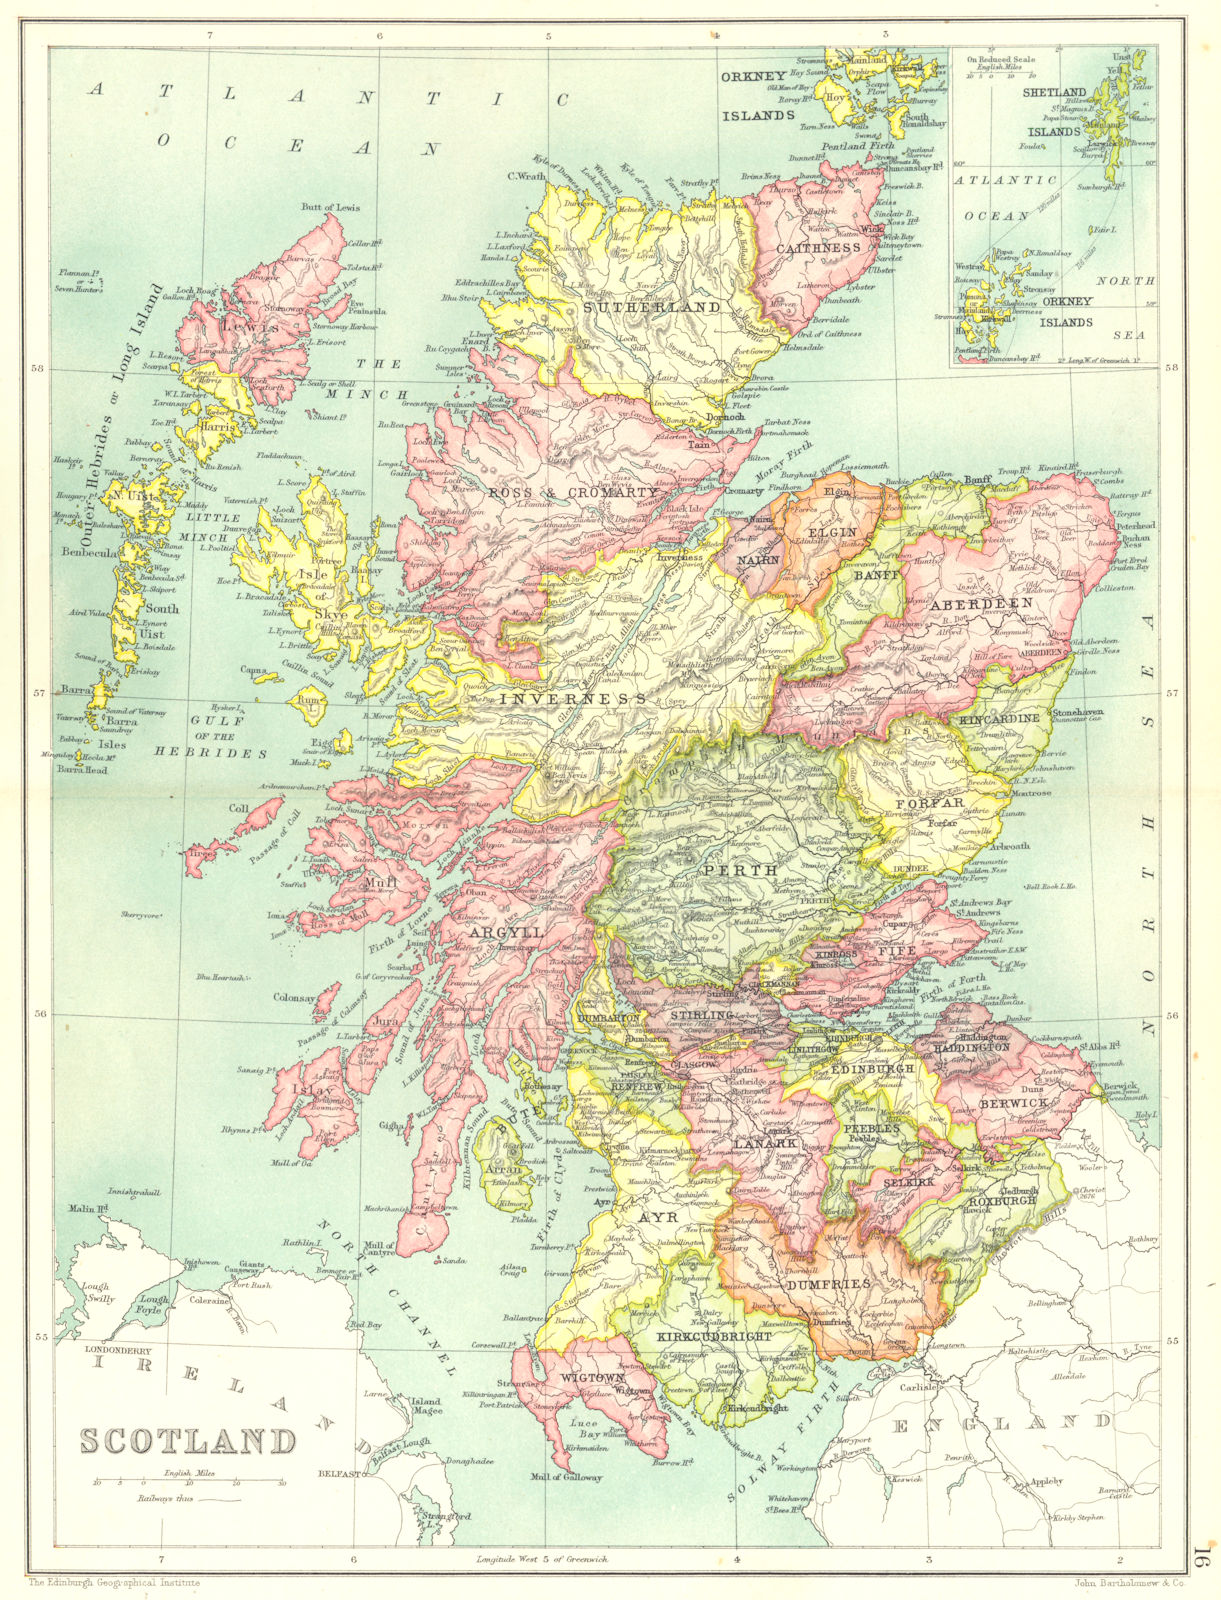 SCOTLAND. Showing counties. Inset Shetland & Orkney Islands 1909 old map